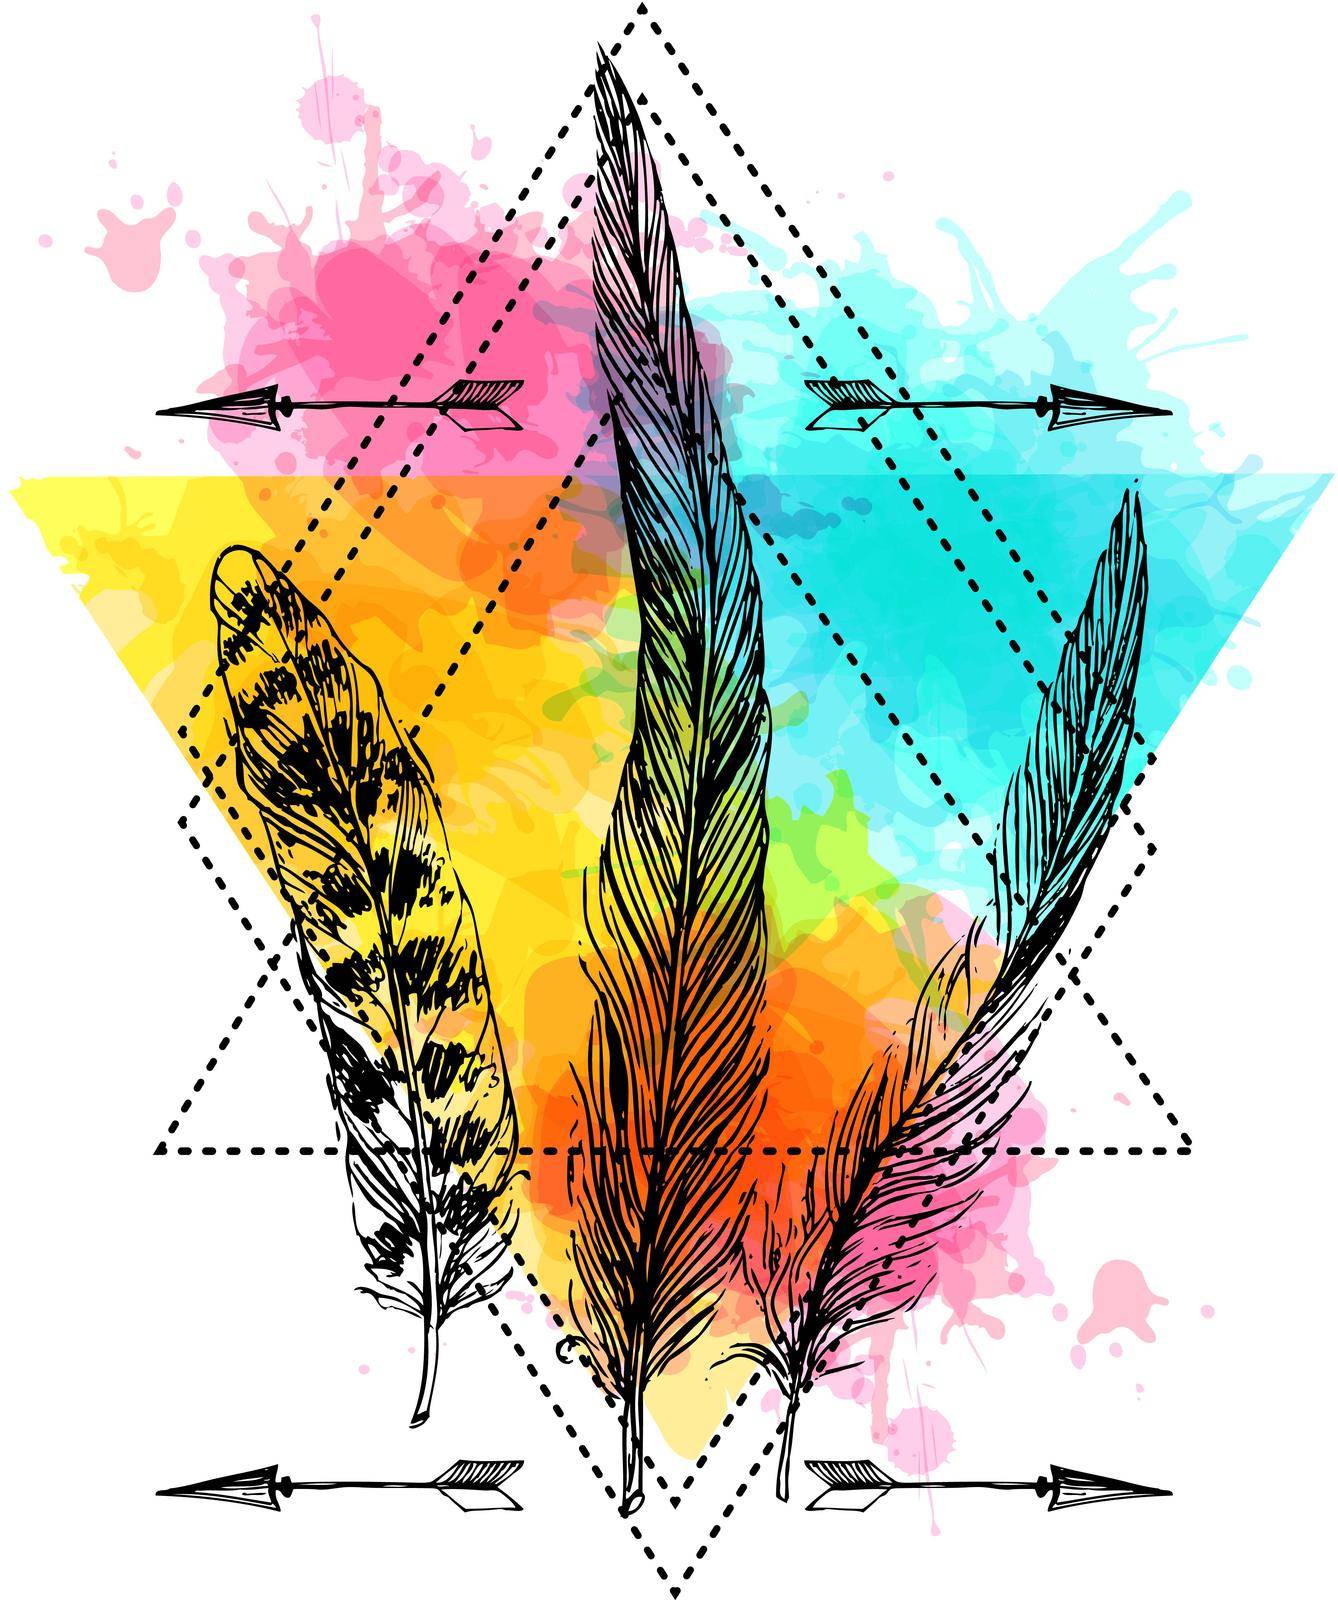 Feathers sketch. Hand drawn vector beautiful illustration. Boho style.